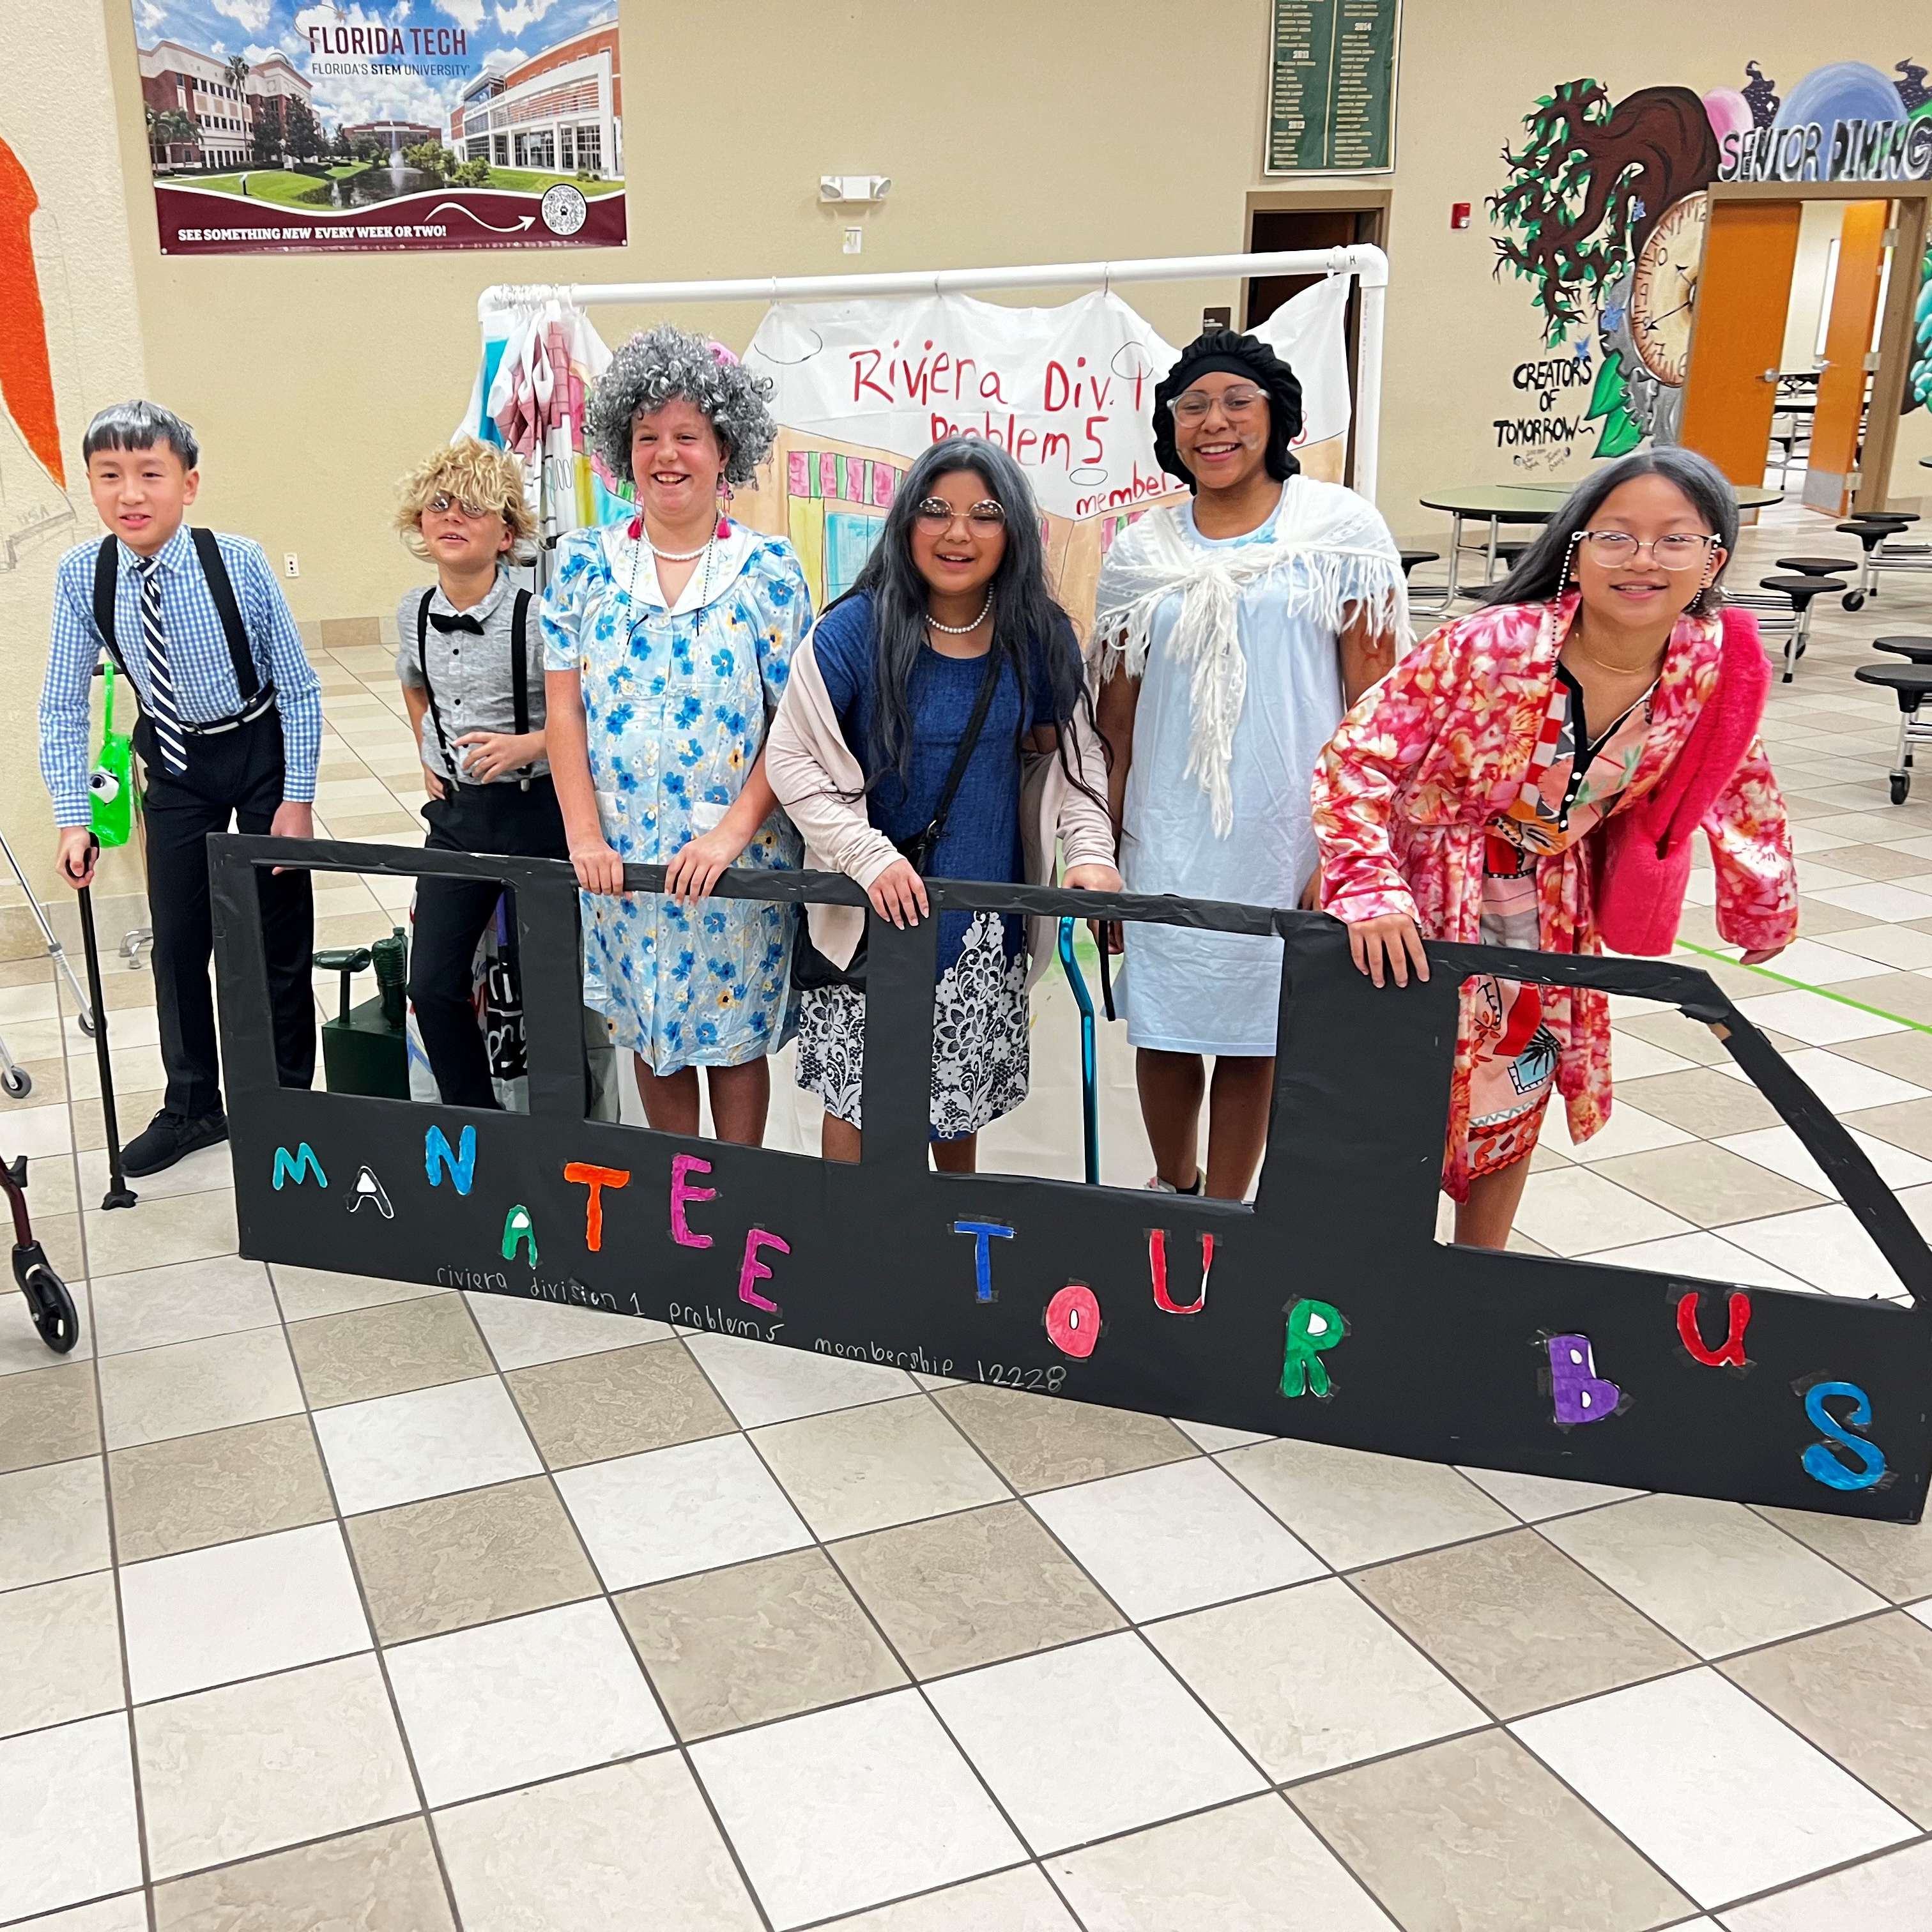 Odyssey of the Mind team in costumes